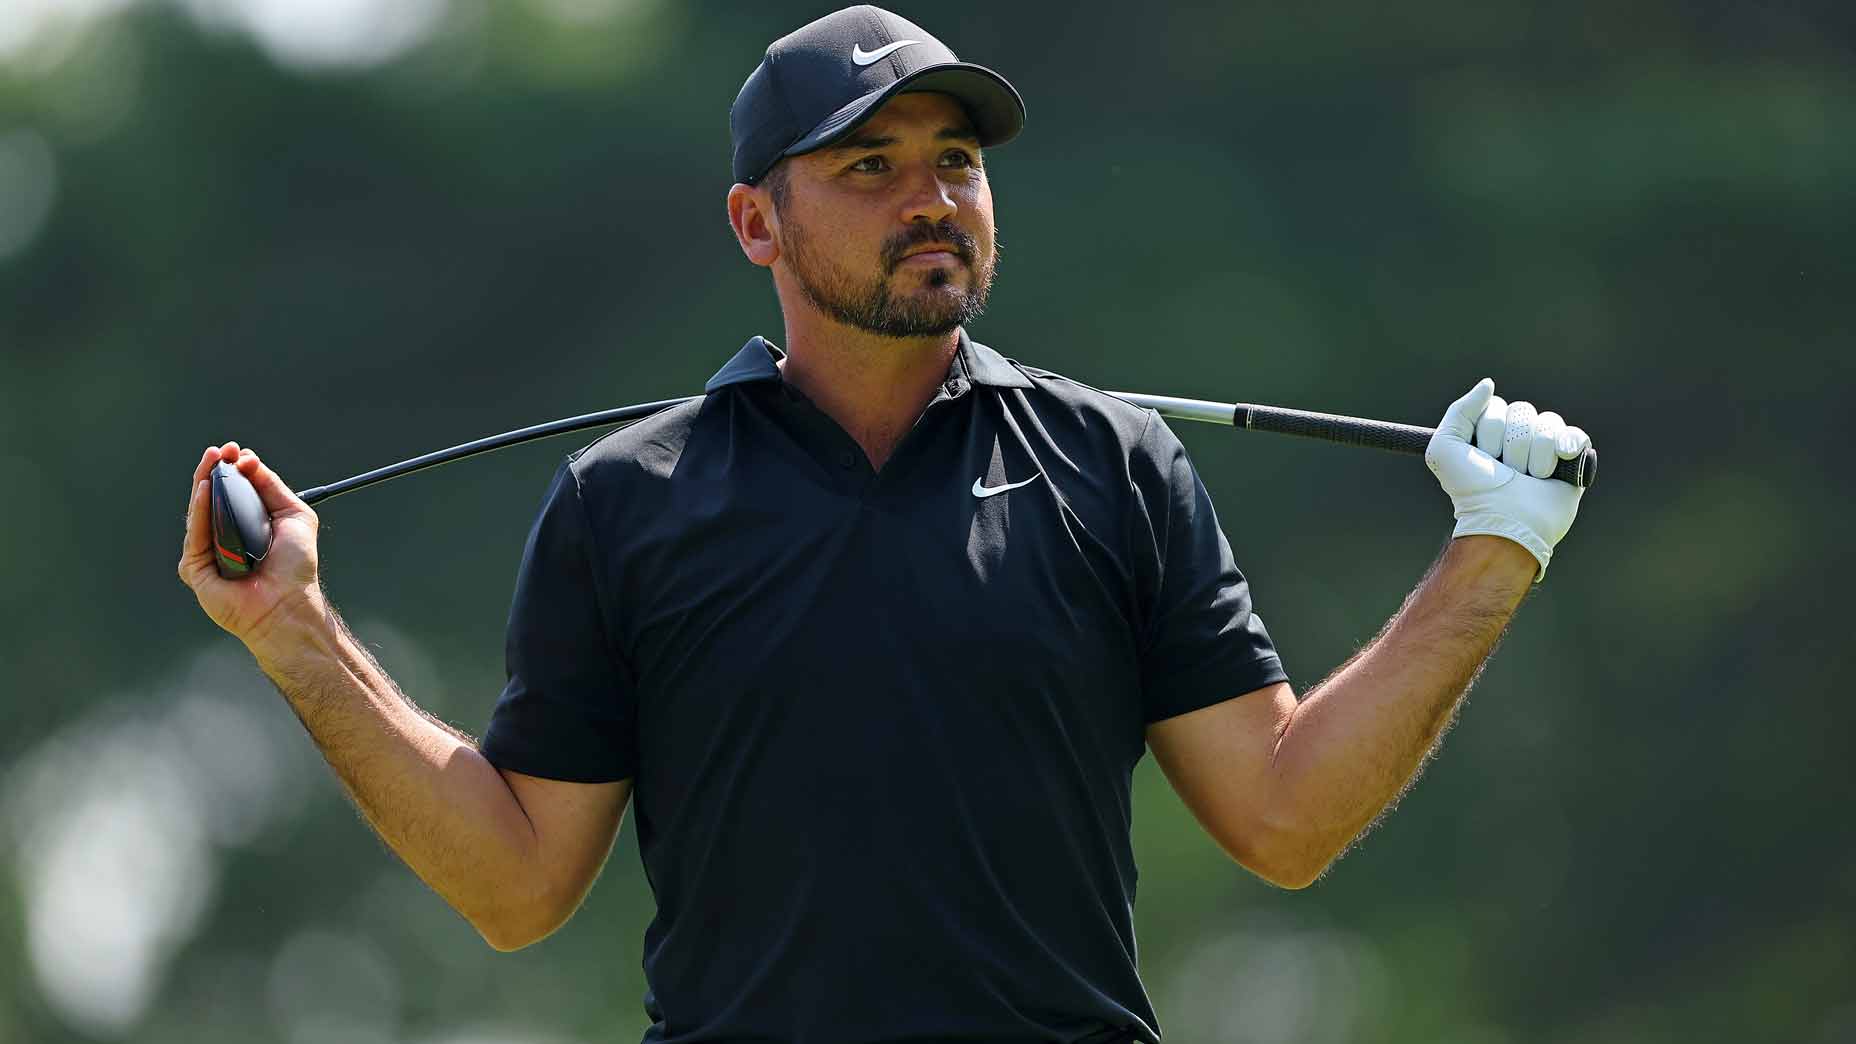 Jason Day explains his plan to get back to World No. 1 — and stay there